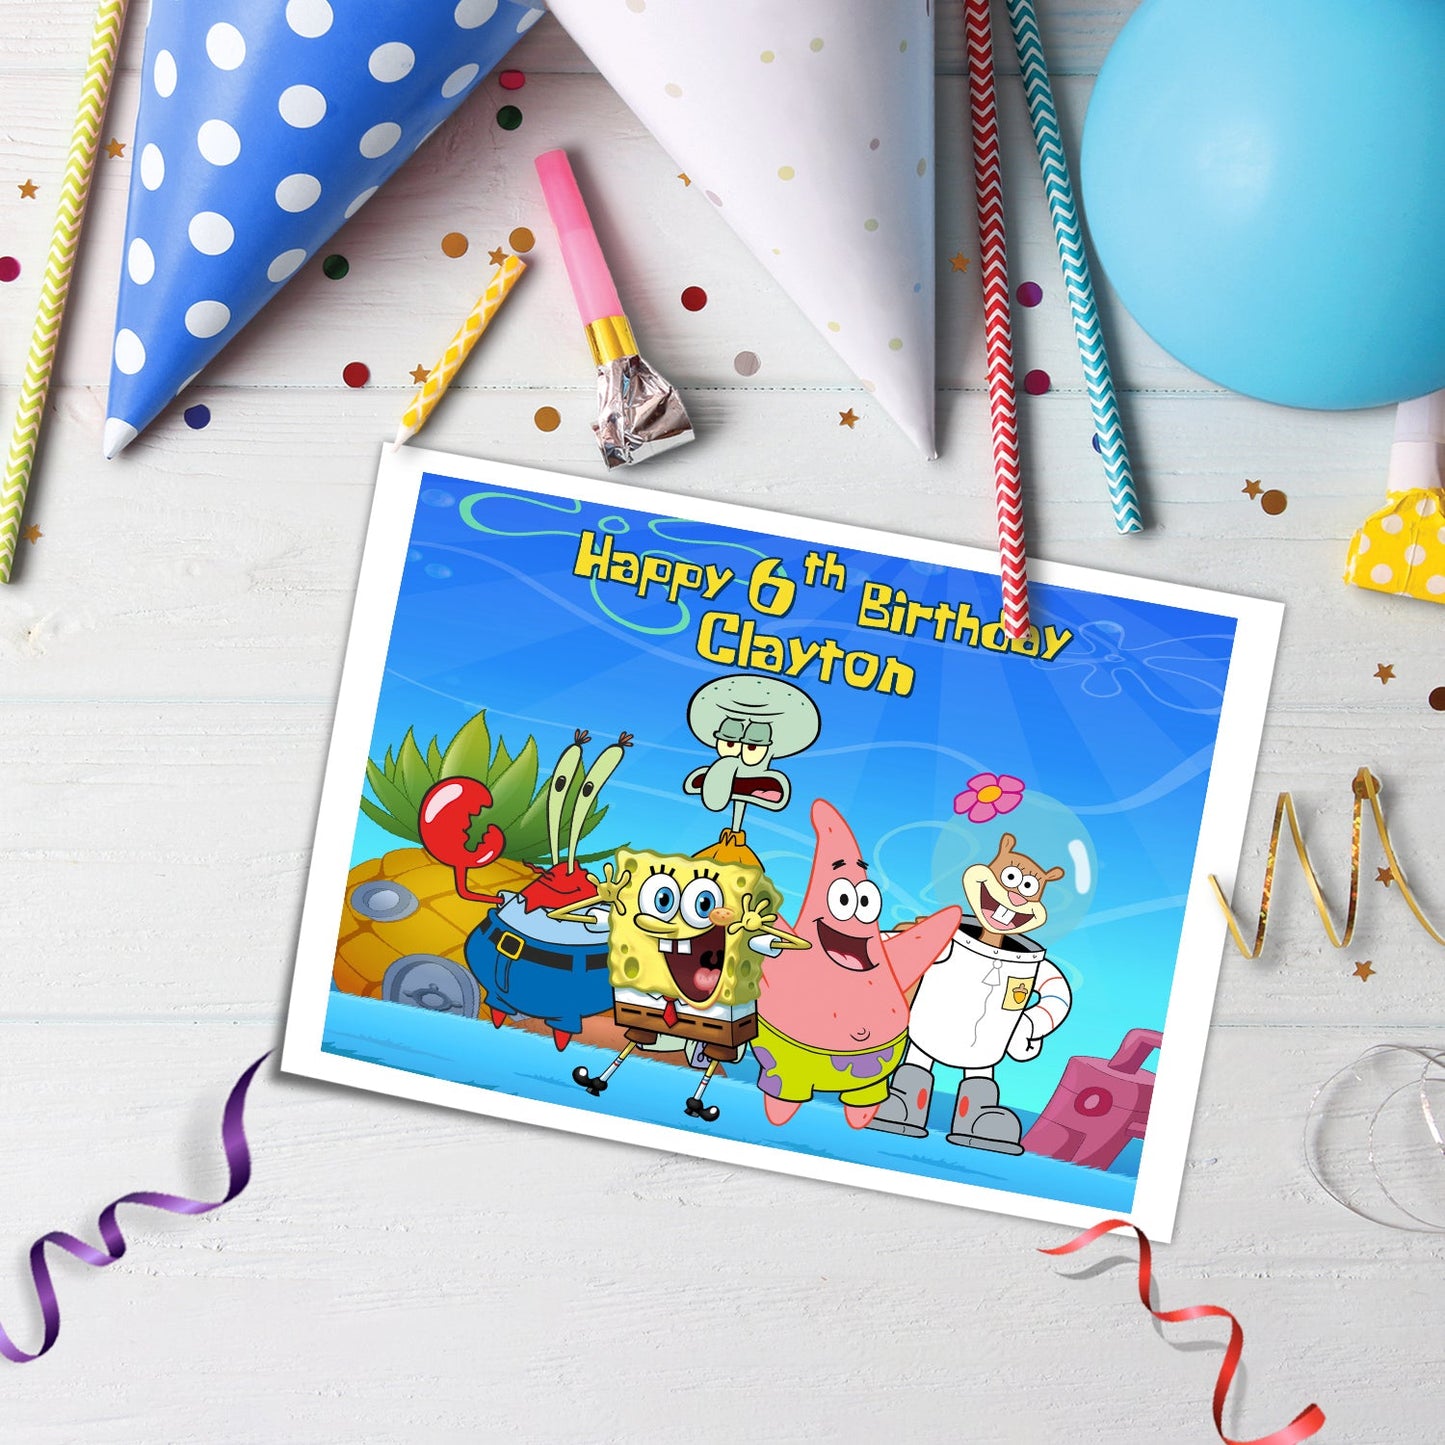 Enhance Your Cake Design with Spongebob Personalized Edible Sheet Cake Images - Rectangle